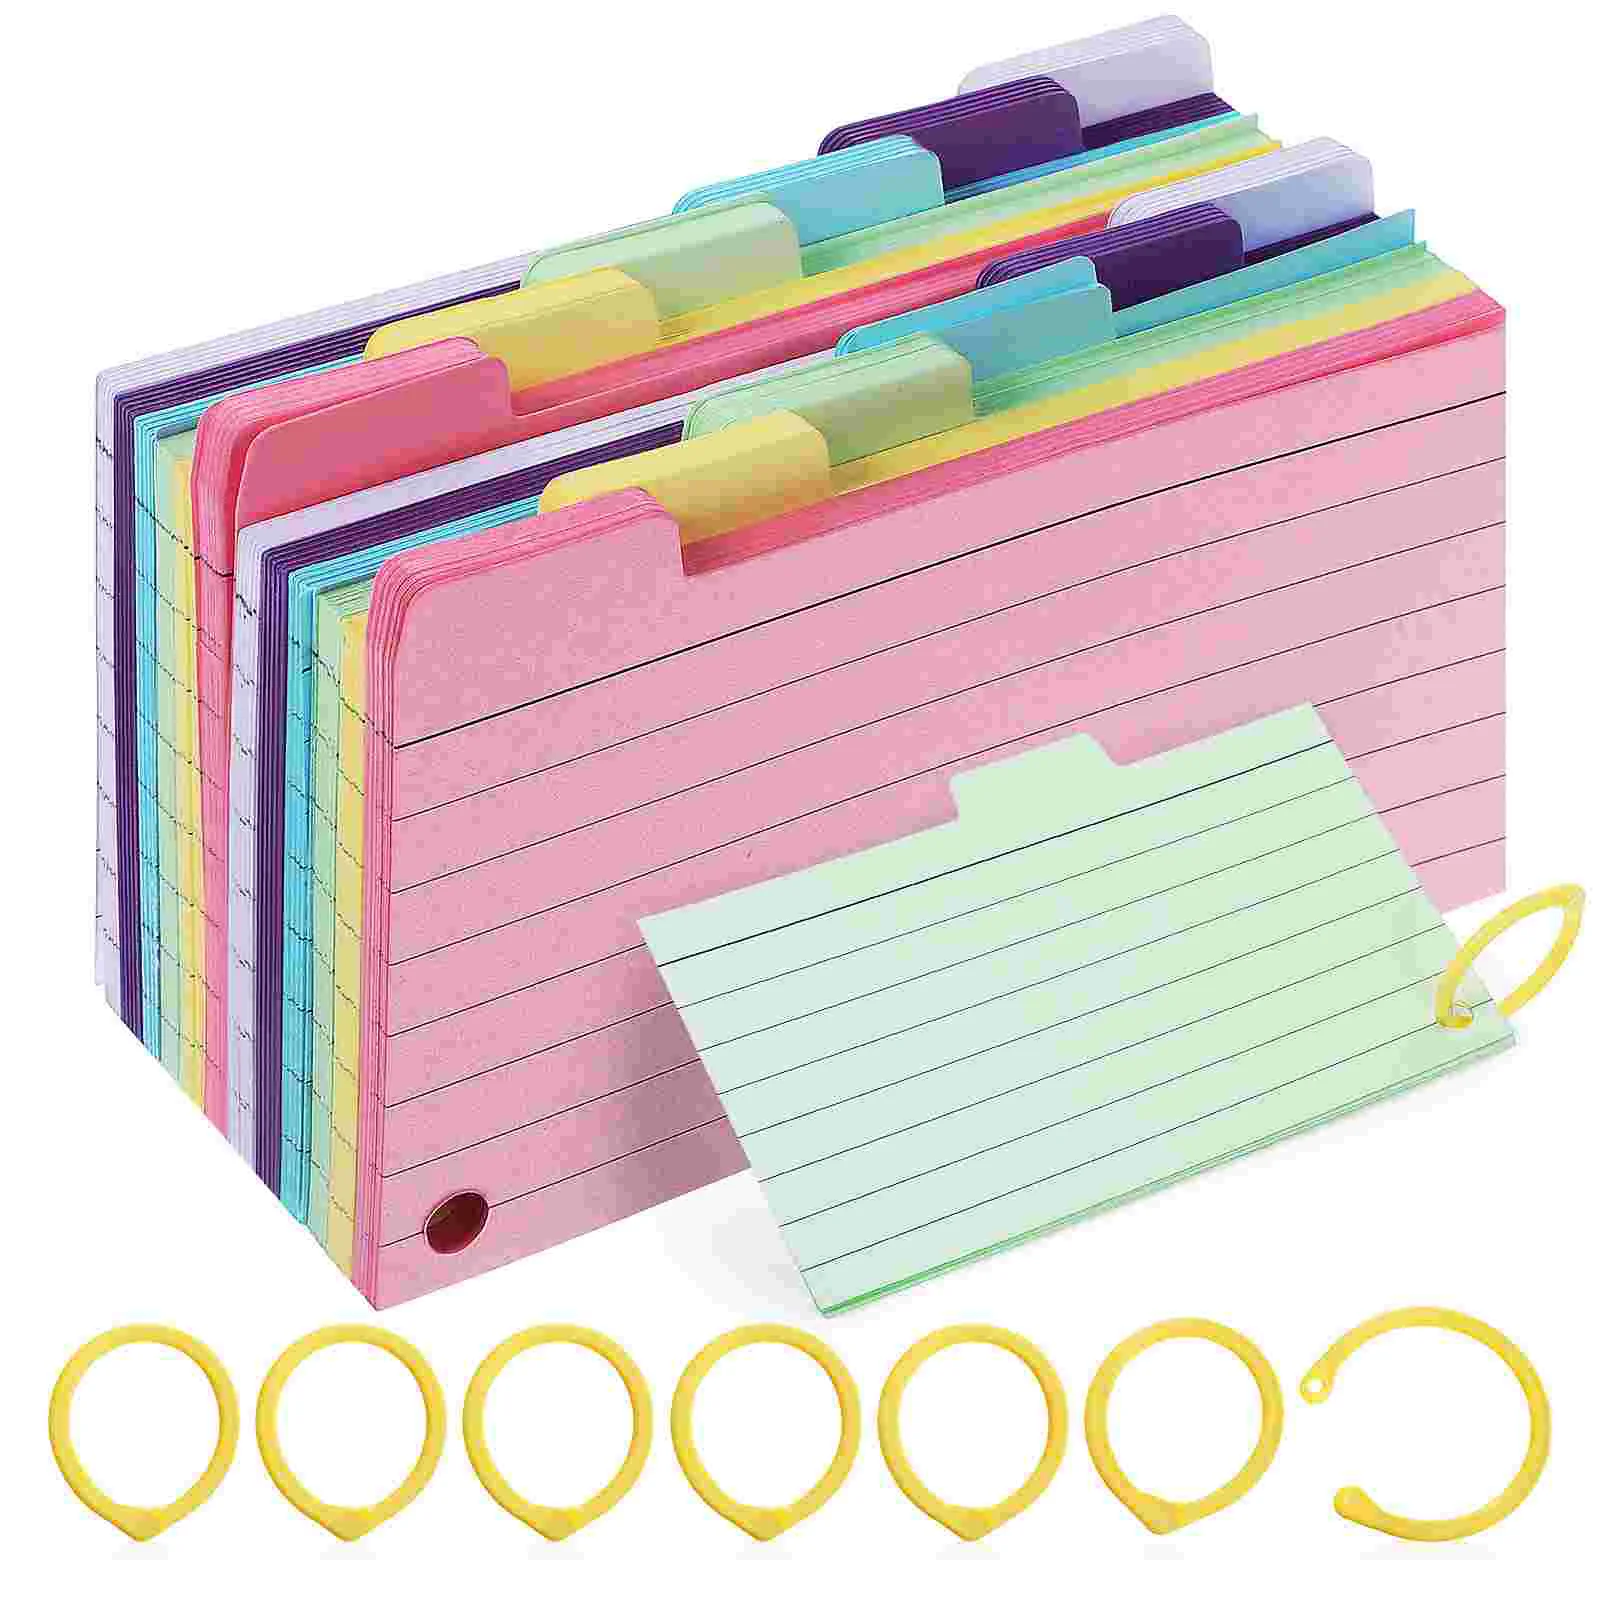 

450Pcs Spiral Notepads Memo Pads Lined Flash Cards with 8 Binder Rings for Study Learning